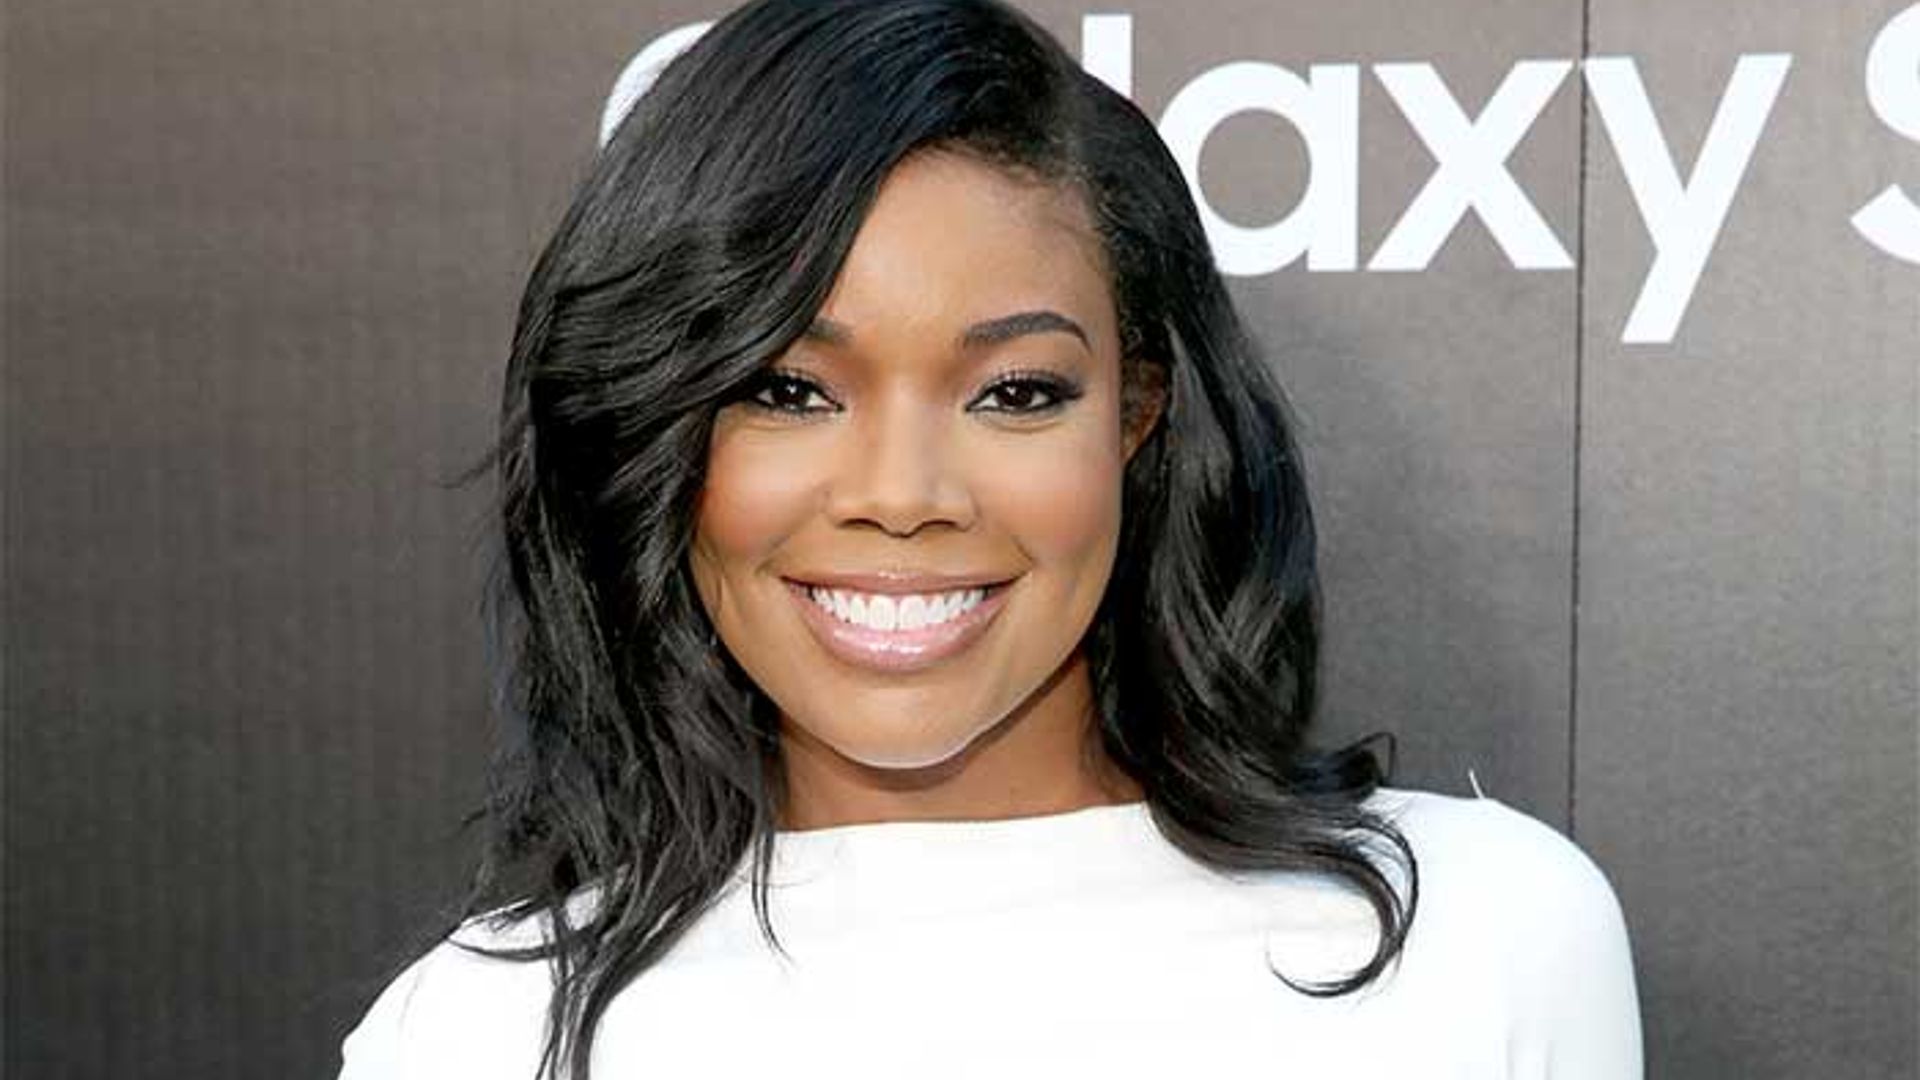 Gabrielle Union wows in a leather bra top for flirty poolside photo